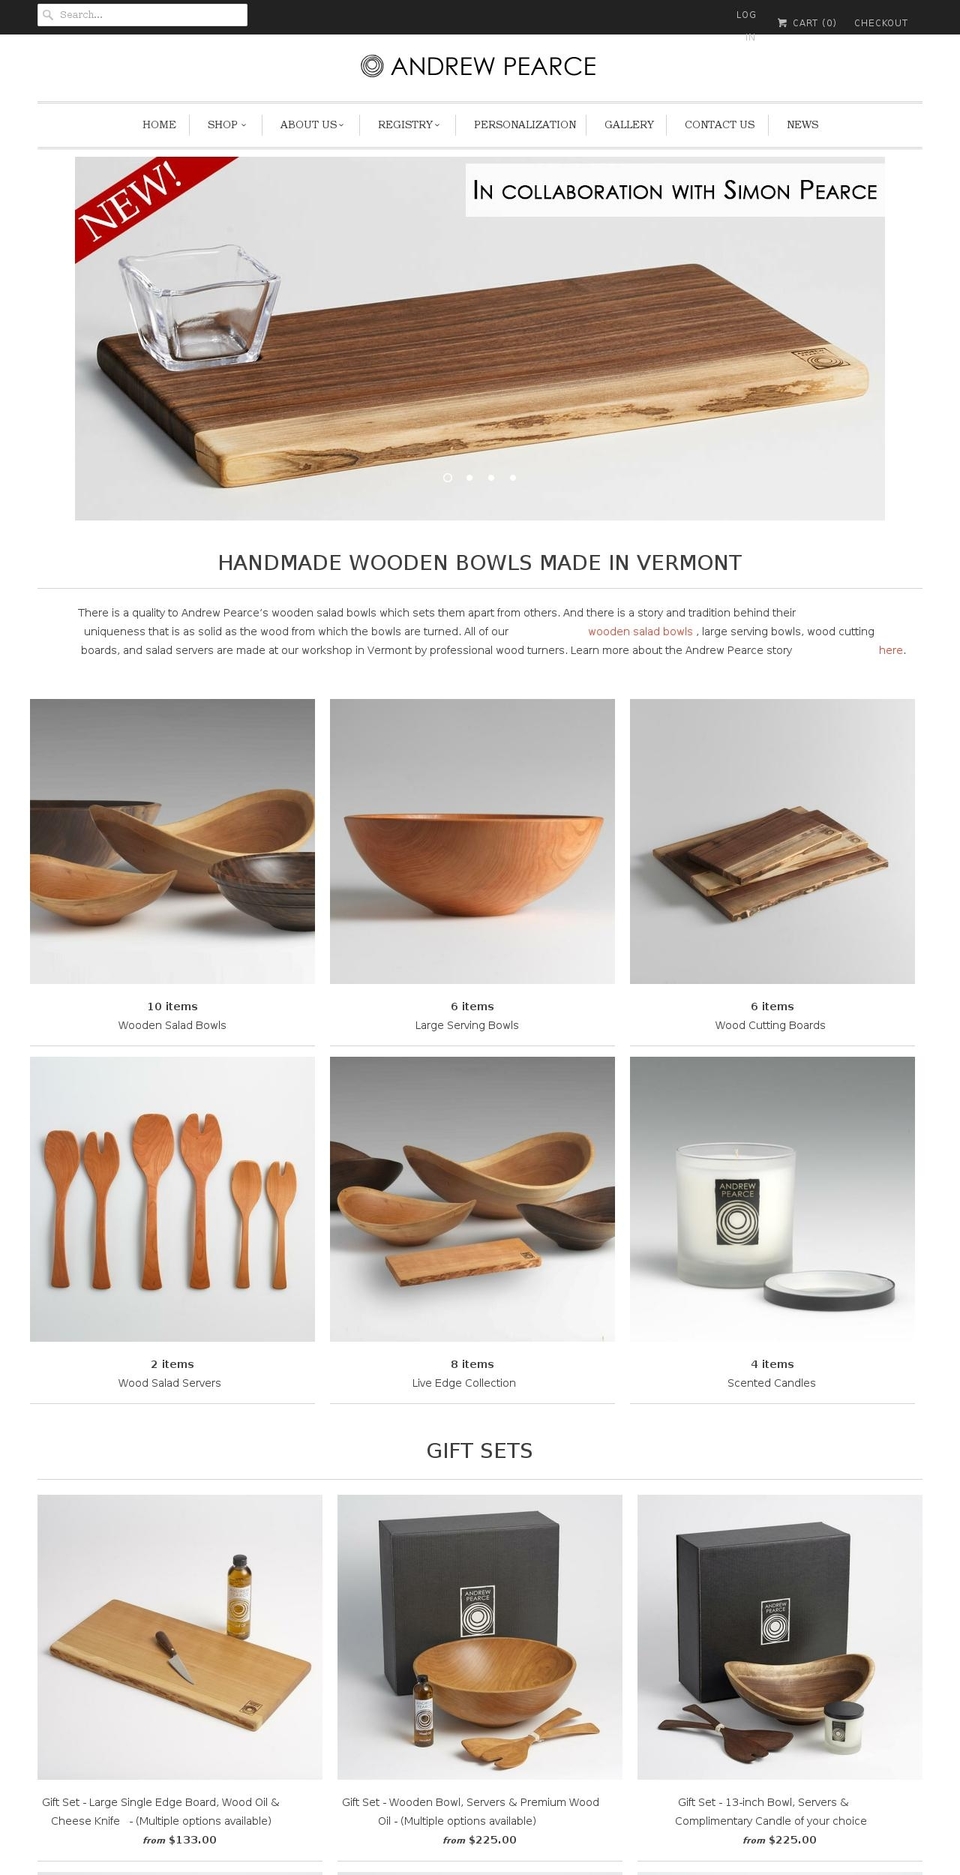 Capital Shopify theme site example andrewpearcebowls.com